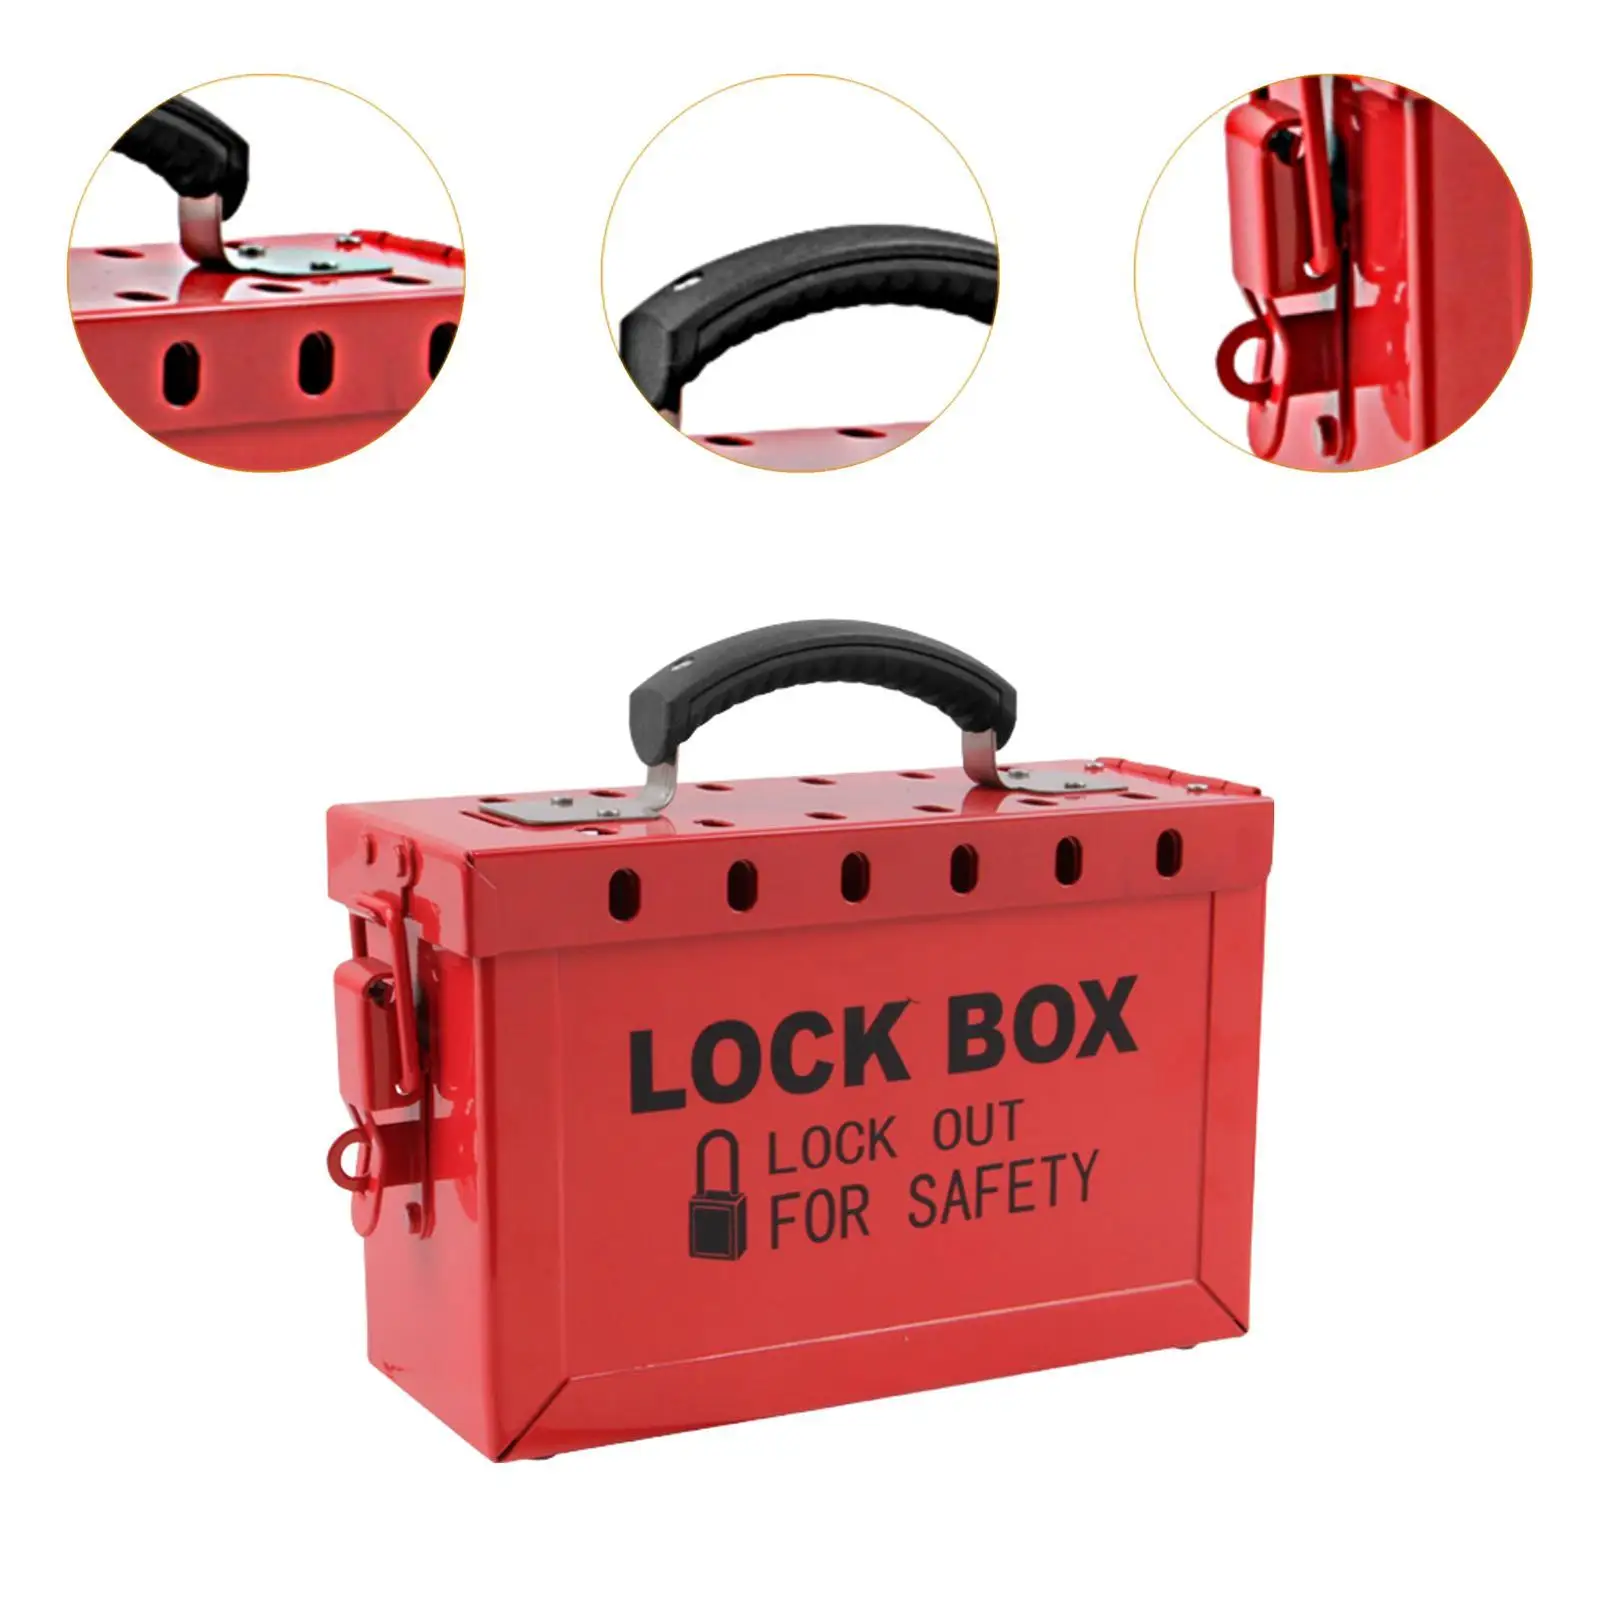 Lock Box Efficiency Lightweight Convenient Red Lockout Tagout Box Lockout Box Padlock Box for Car Factory Device Management